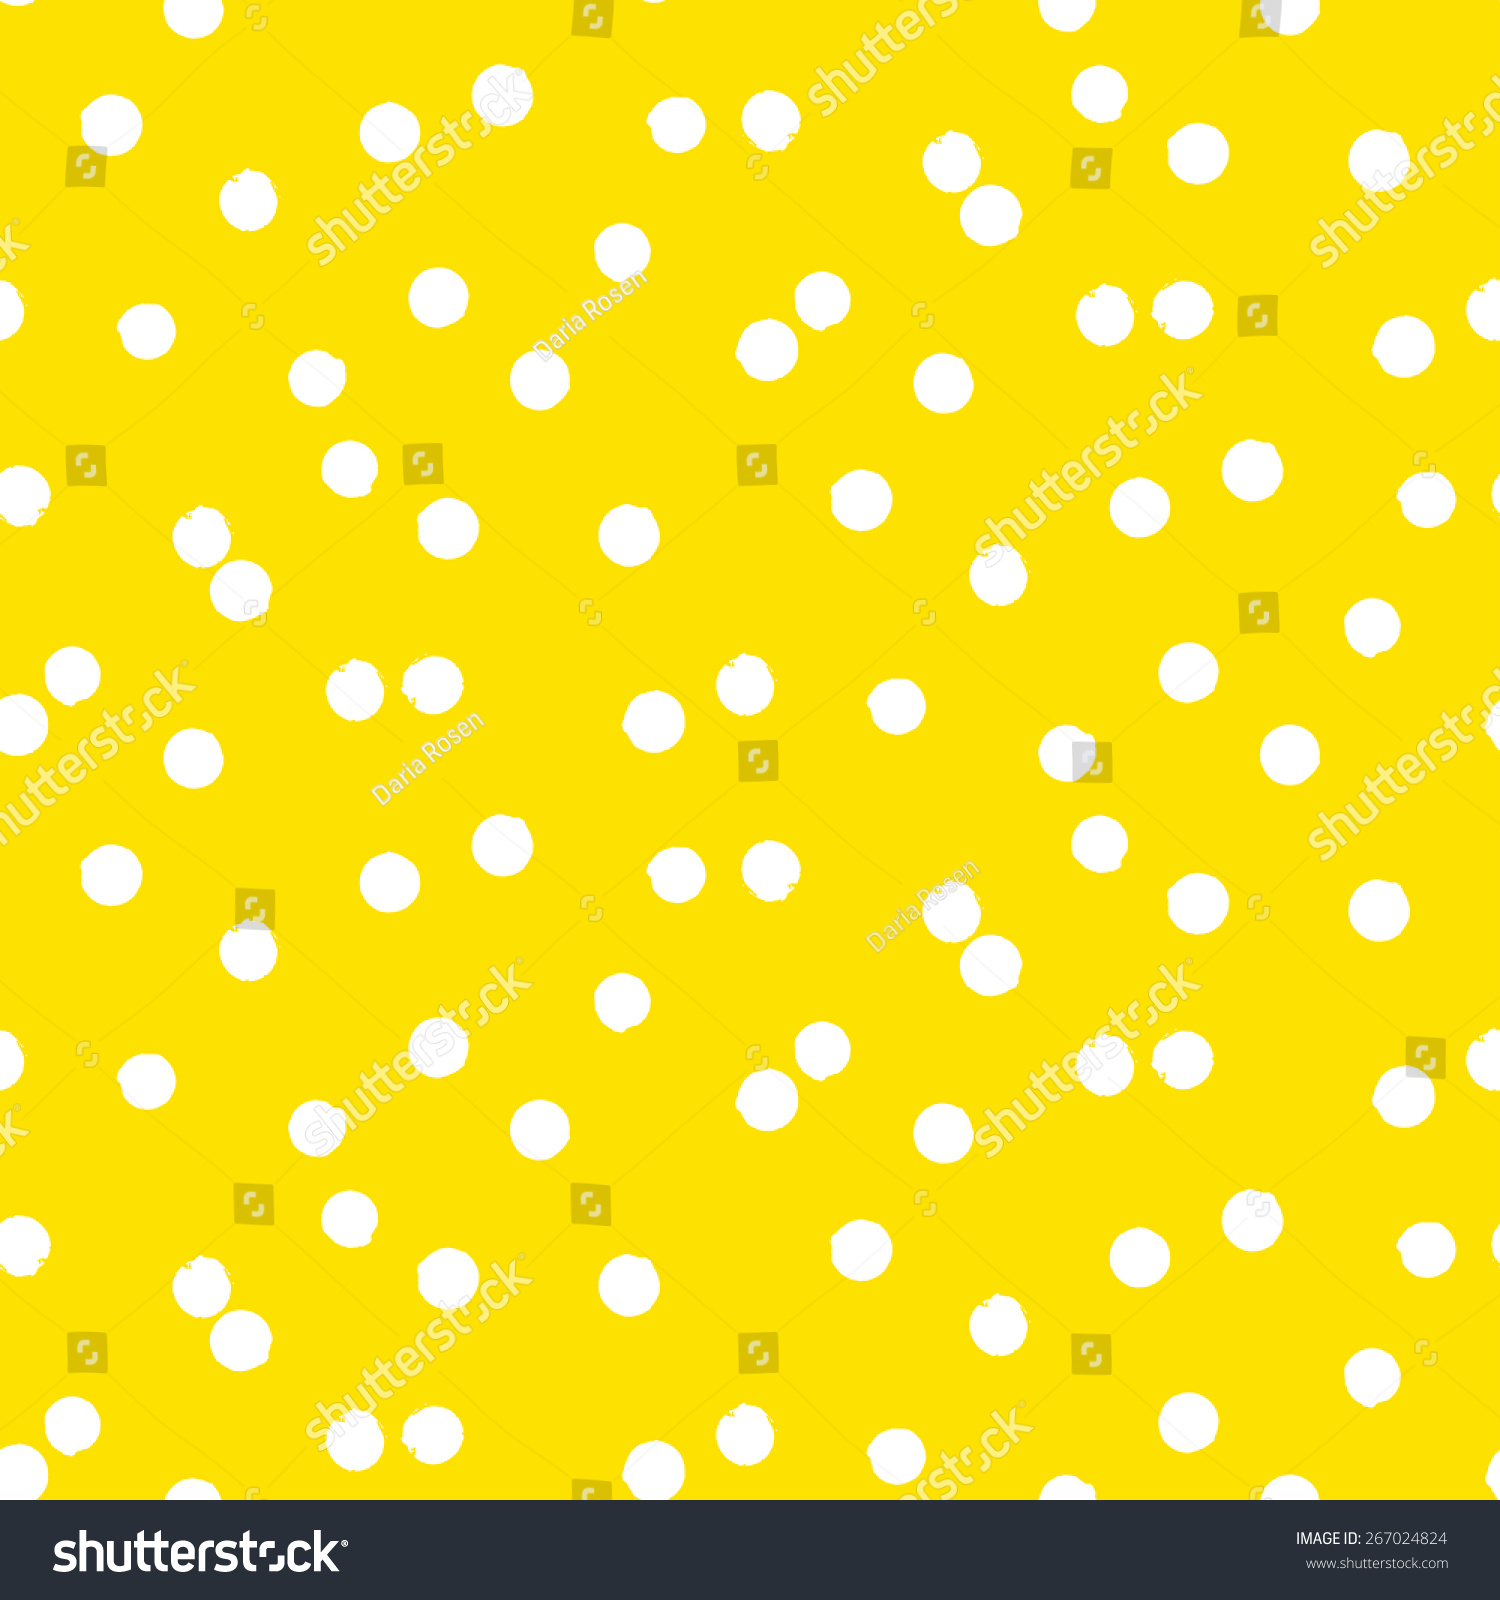 Ditsy Vector Polka Dot Pattern Scattered Stock Vector (Royalty Free ...